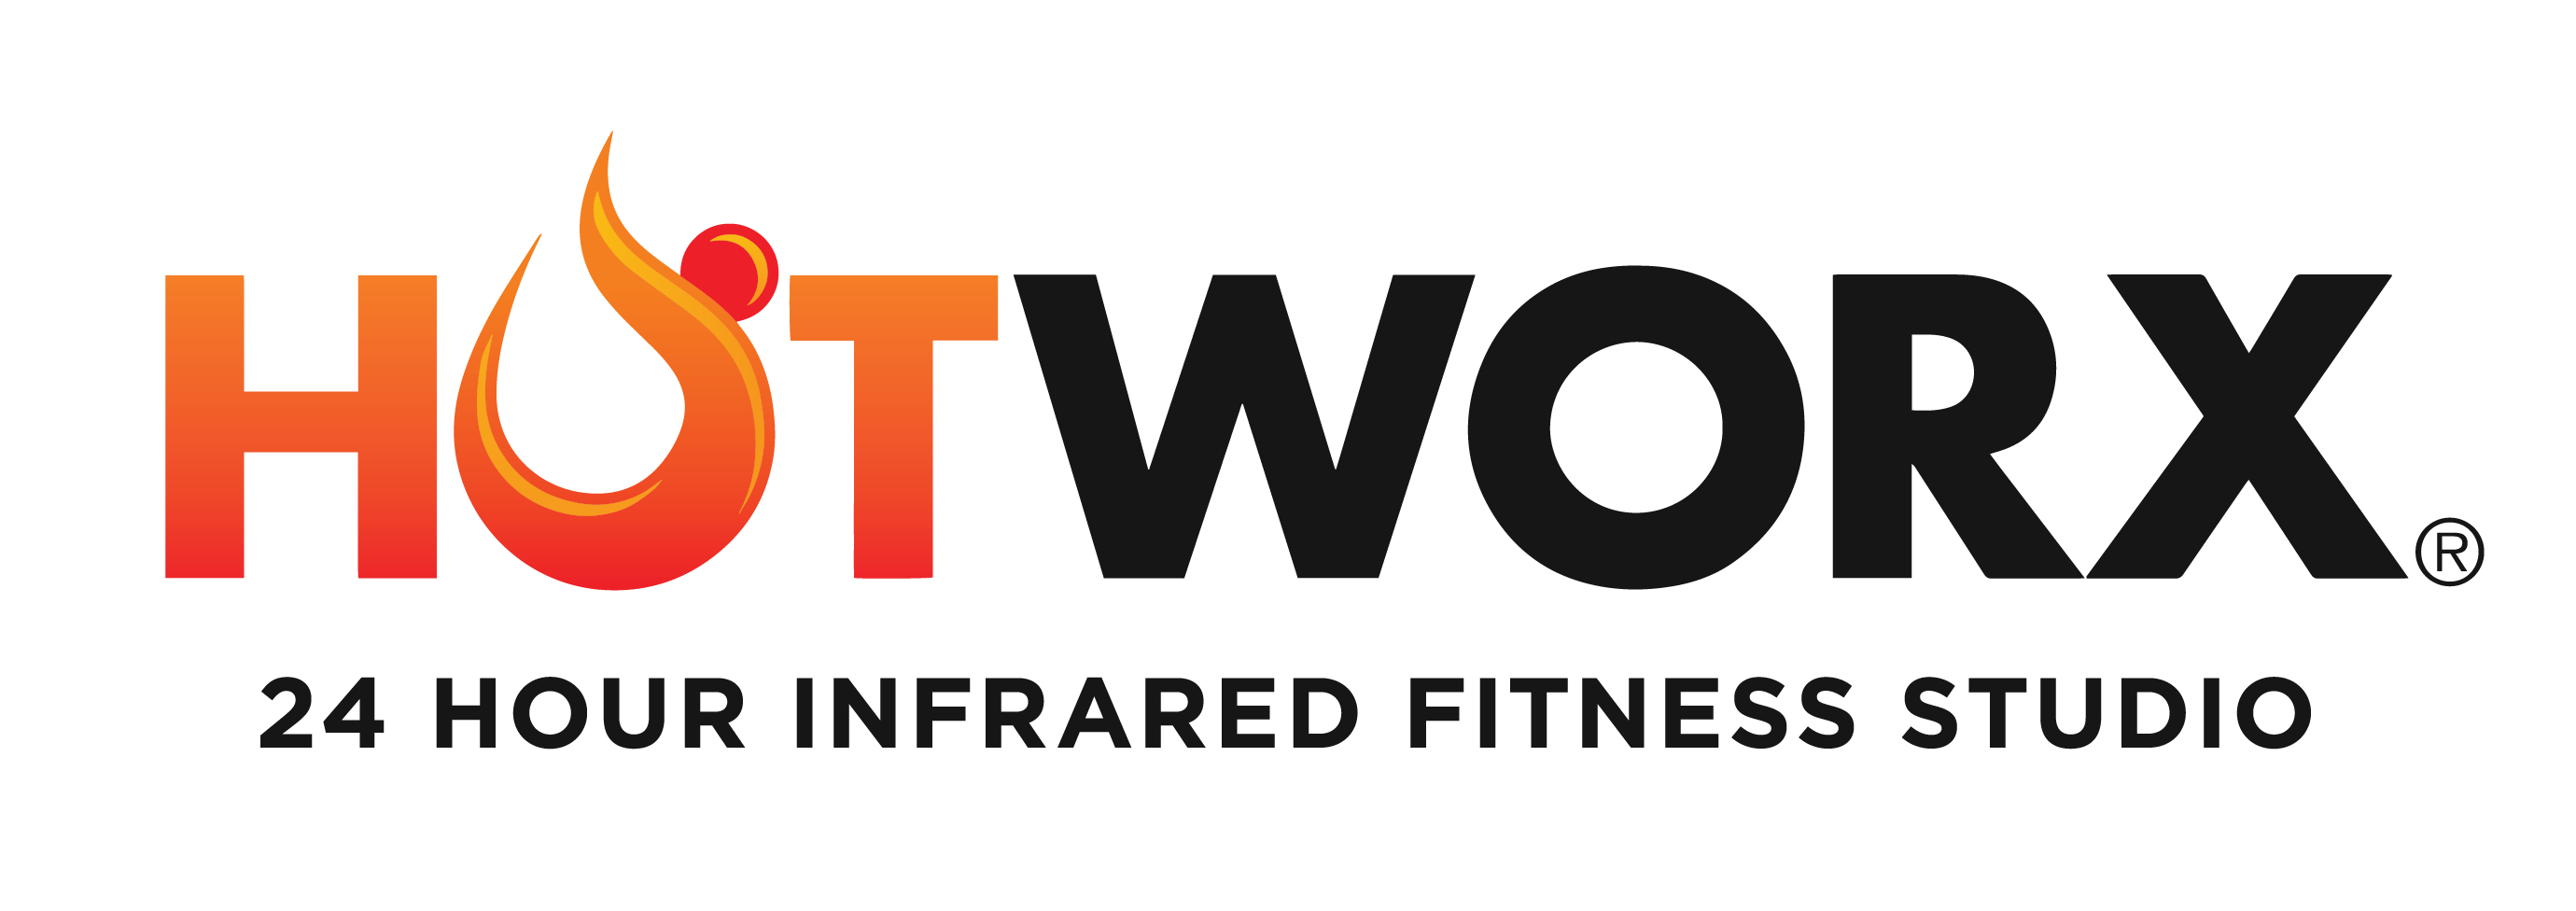 HOTWORX - Fitness Health Studios - Franchise Central